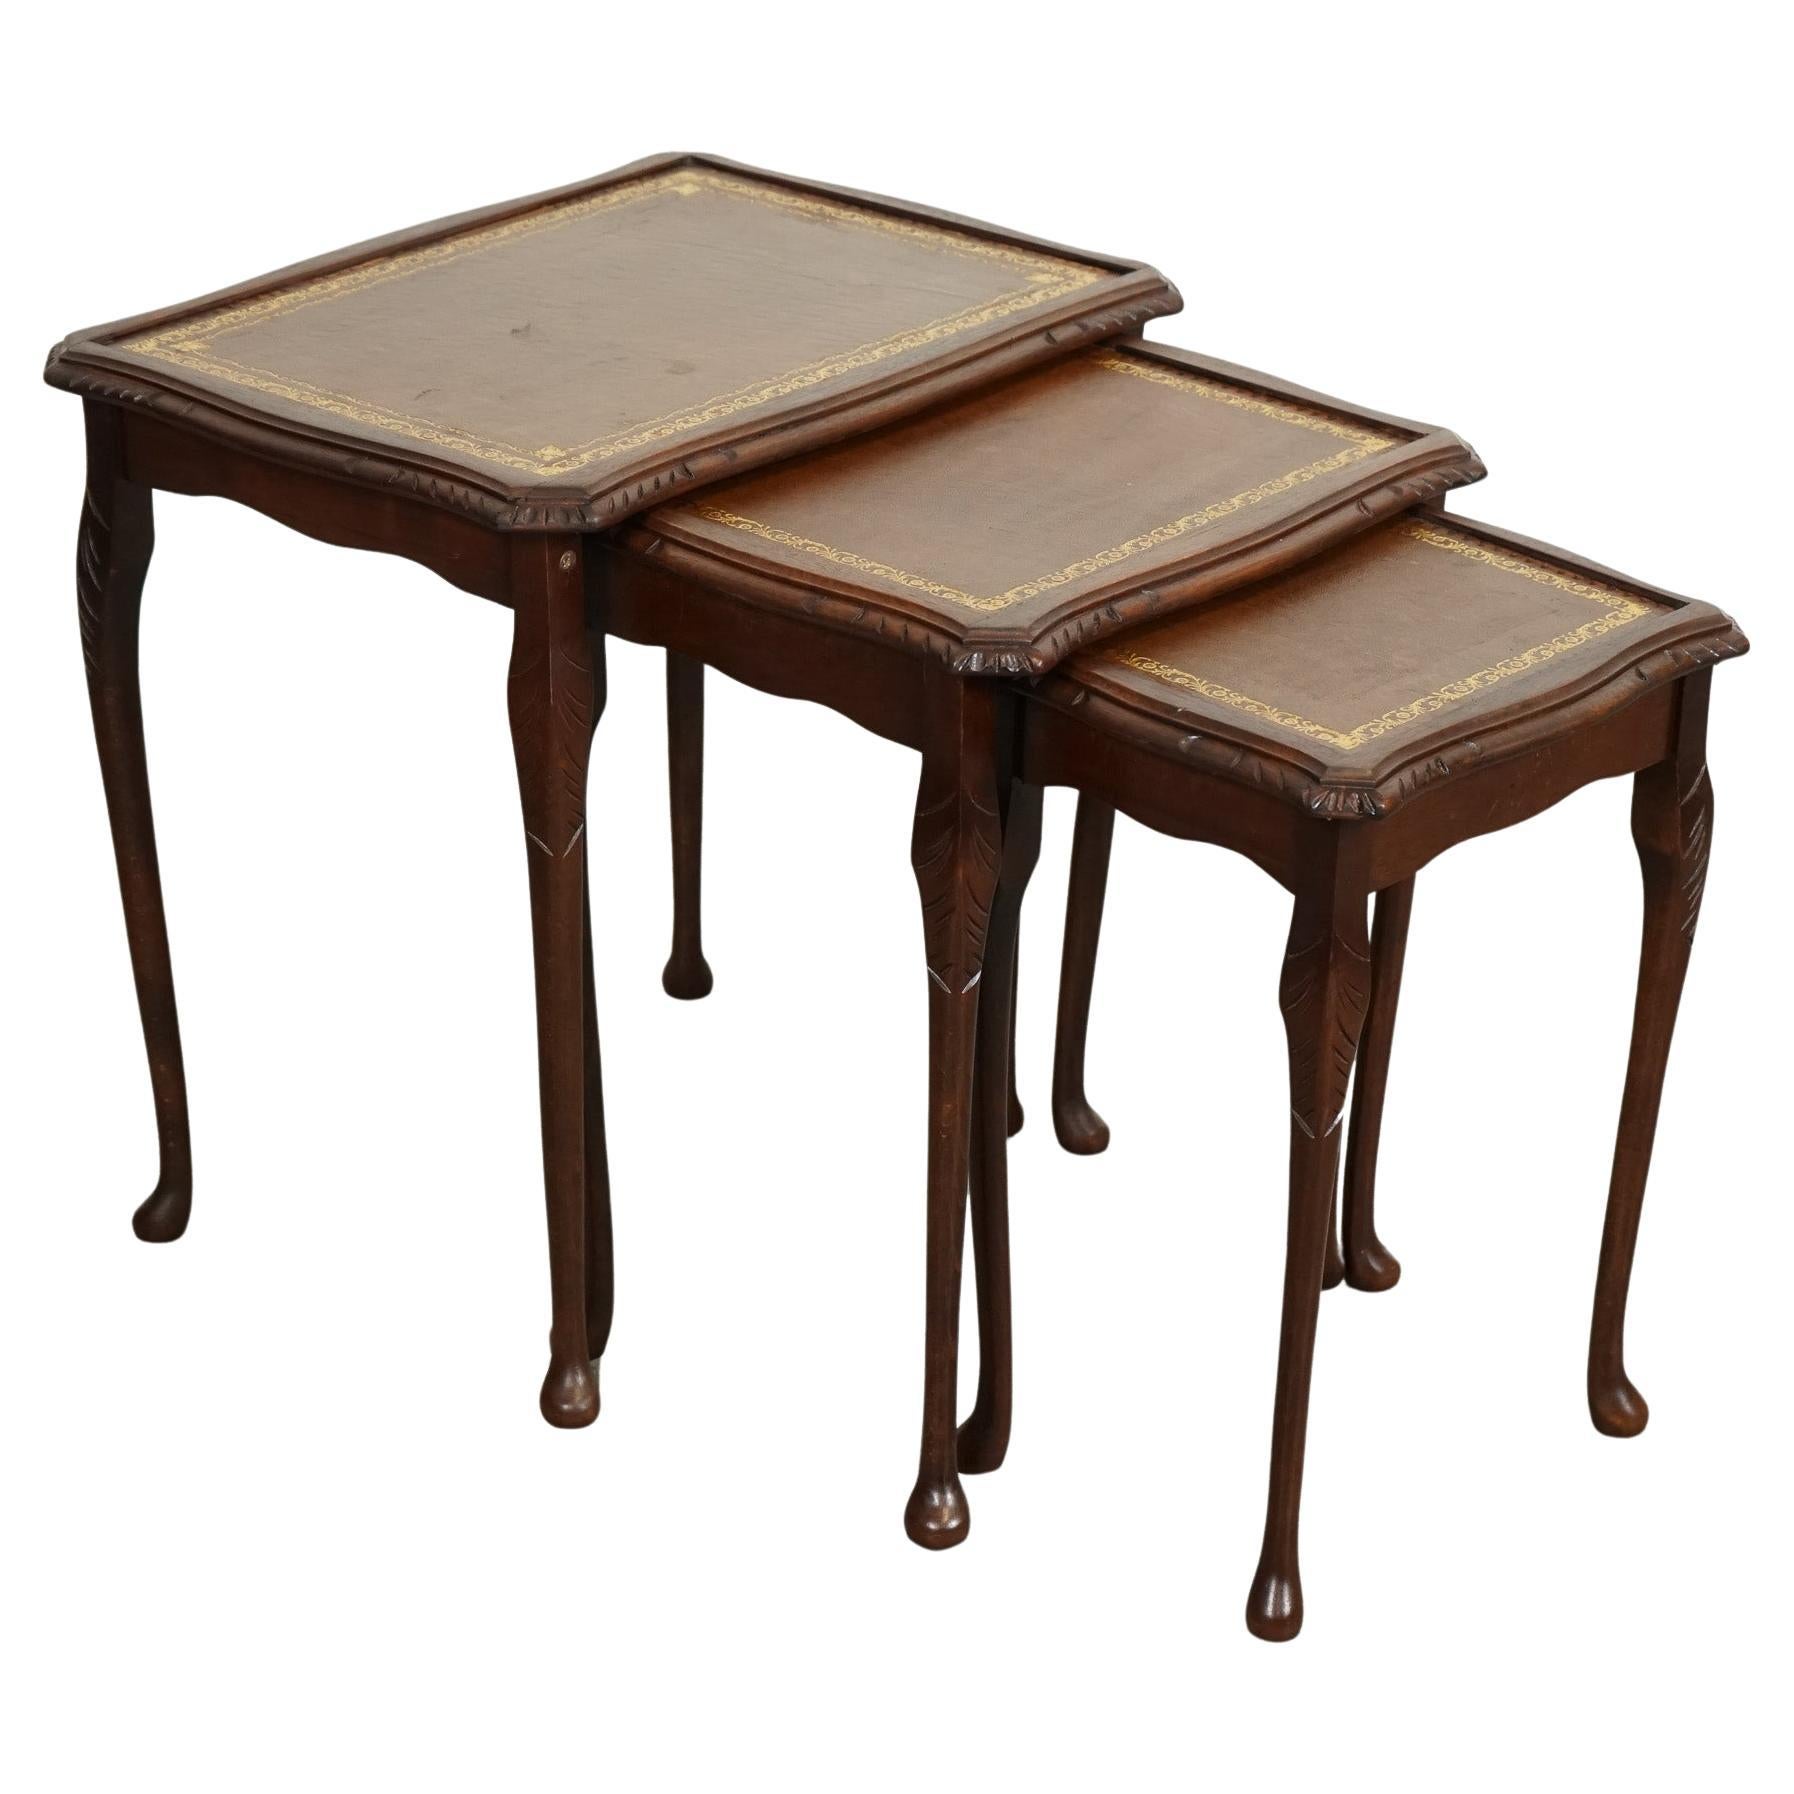 VINTAGE NEST OF TABLES QUEEN ANNE STYLE LEGS WiTH BROWN EMBOSSED LEATHER TOP For Sale